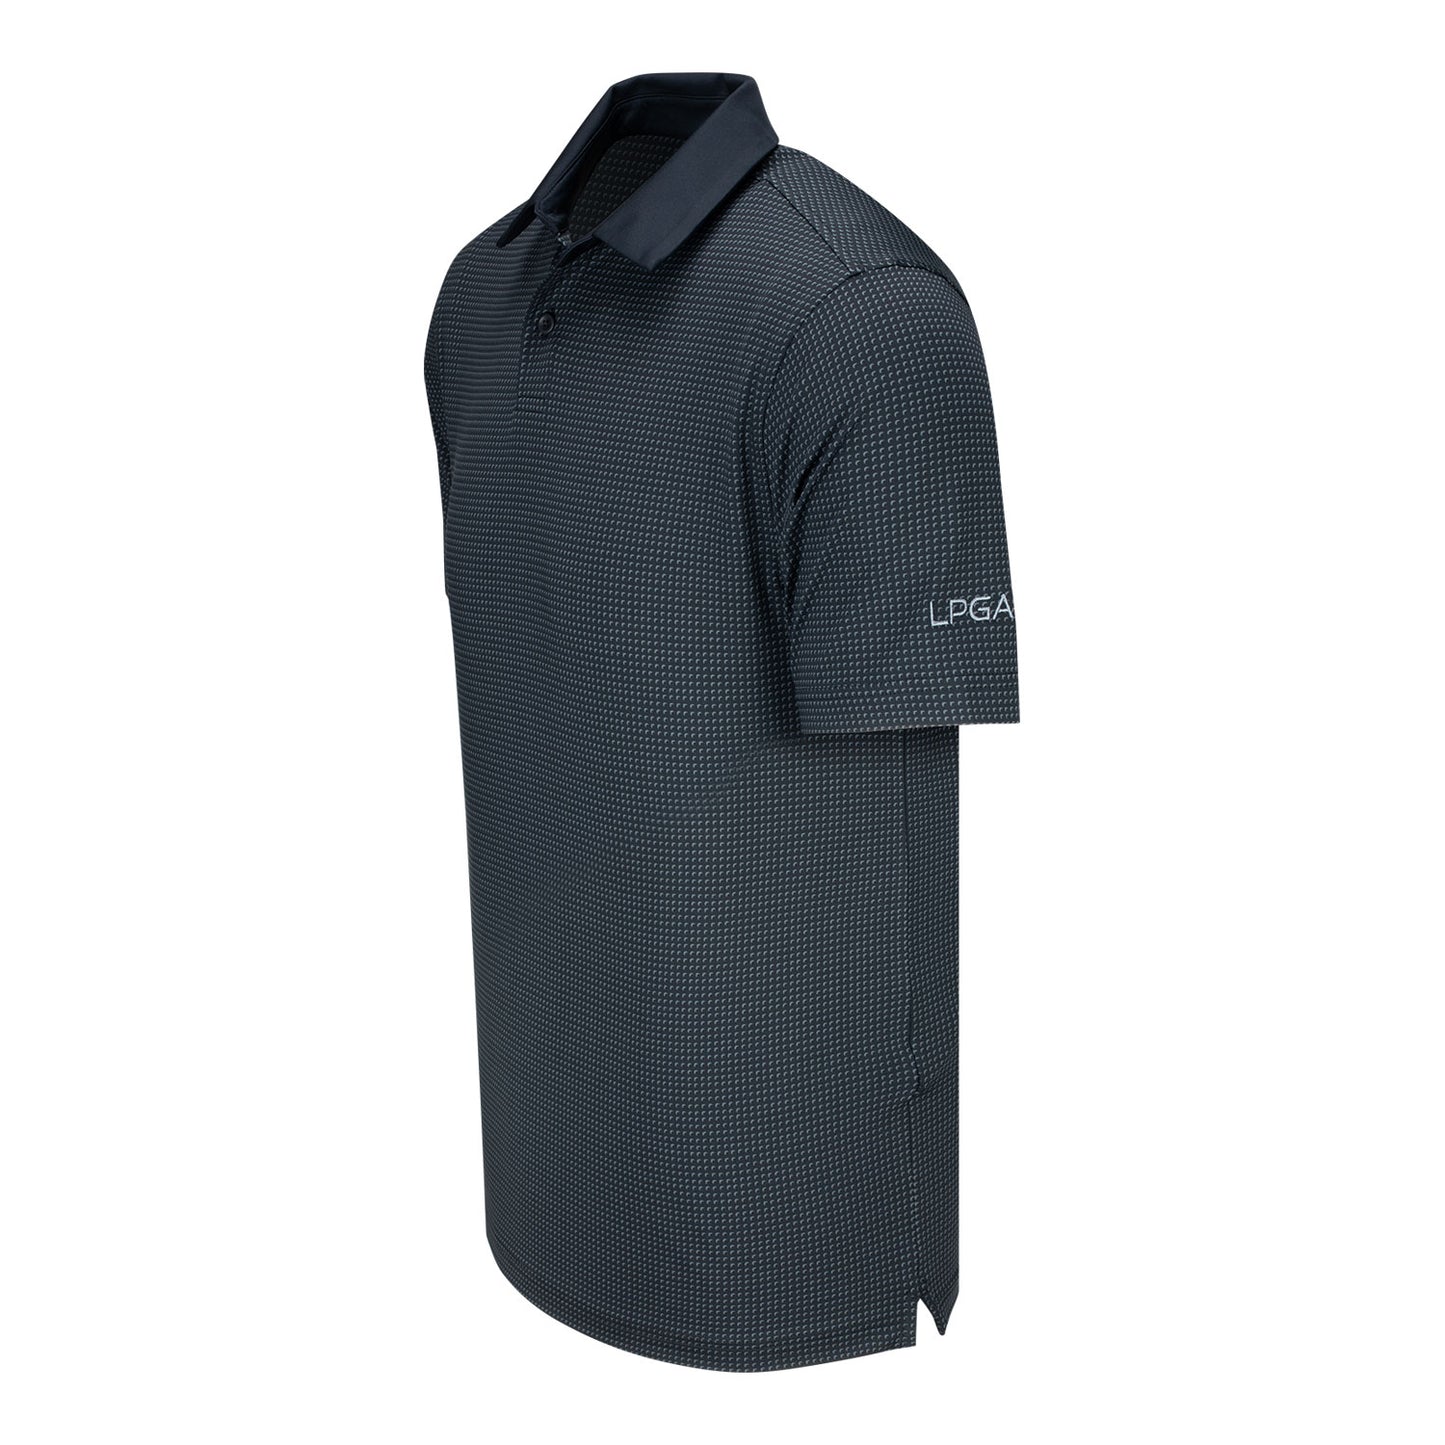 Under Armour LPGA Men's Half Moons Short Sleeve Polo - Angled Left Side View